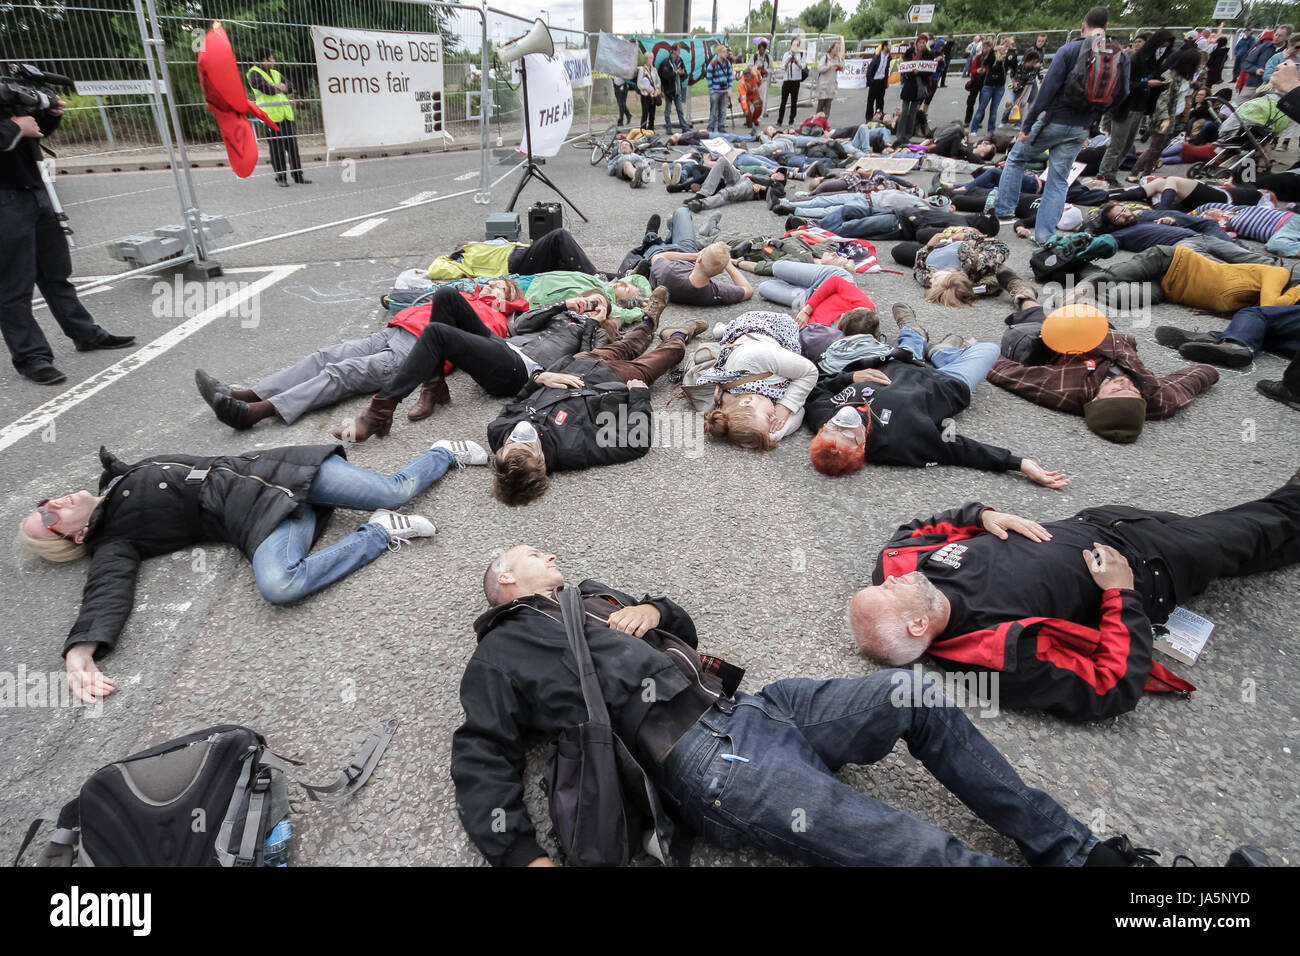 'Die-In' protest. Stop the Arms Fair. Anti-war protest outside Excel Centre in east London, UK. Stock Photo